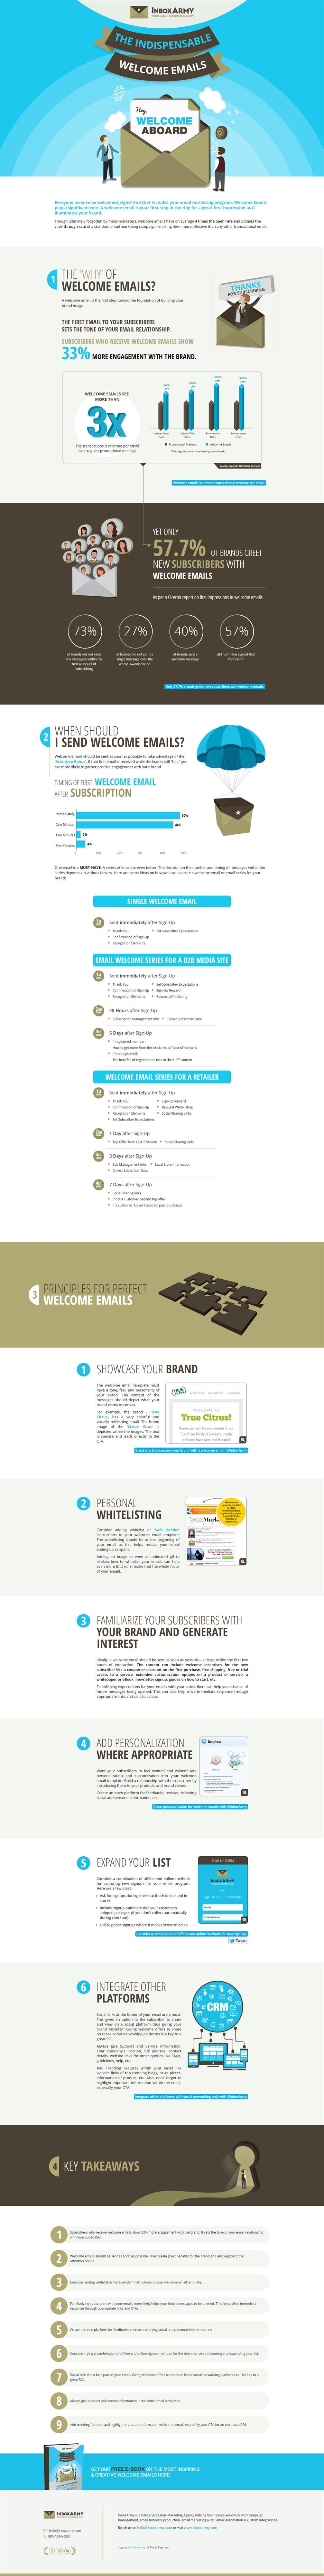 Boost Engagement by 33% With a Simple Welcome Email [Infographic]